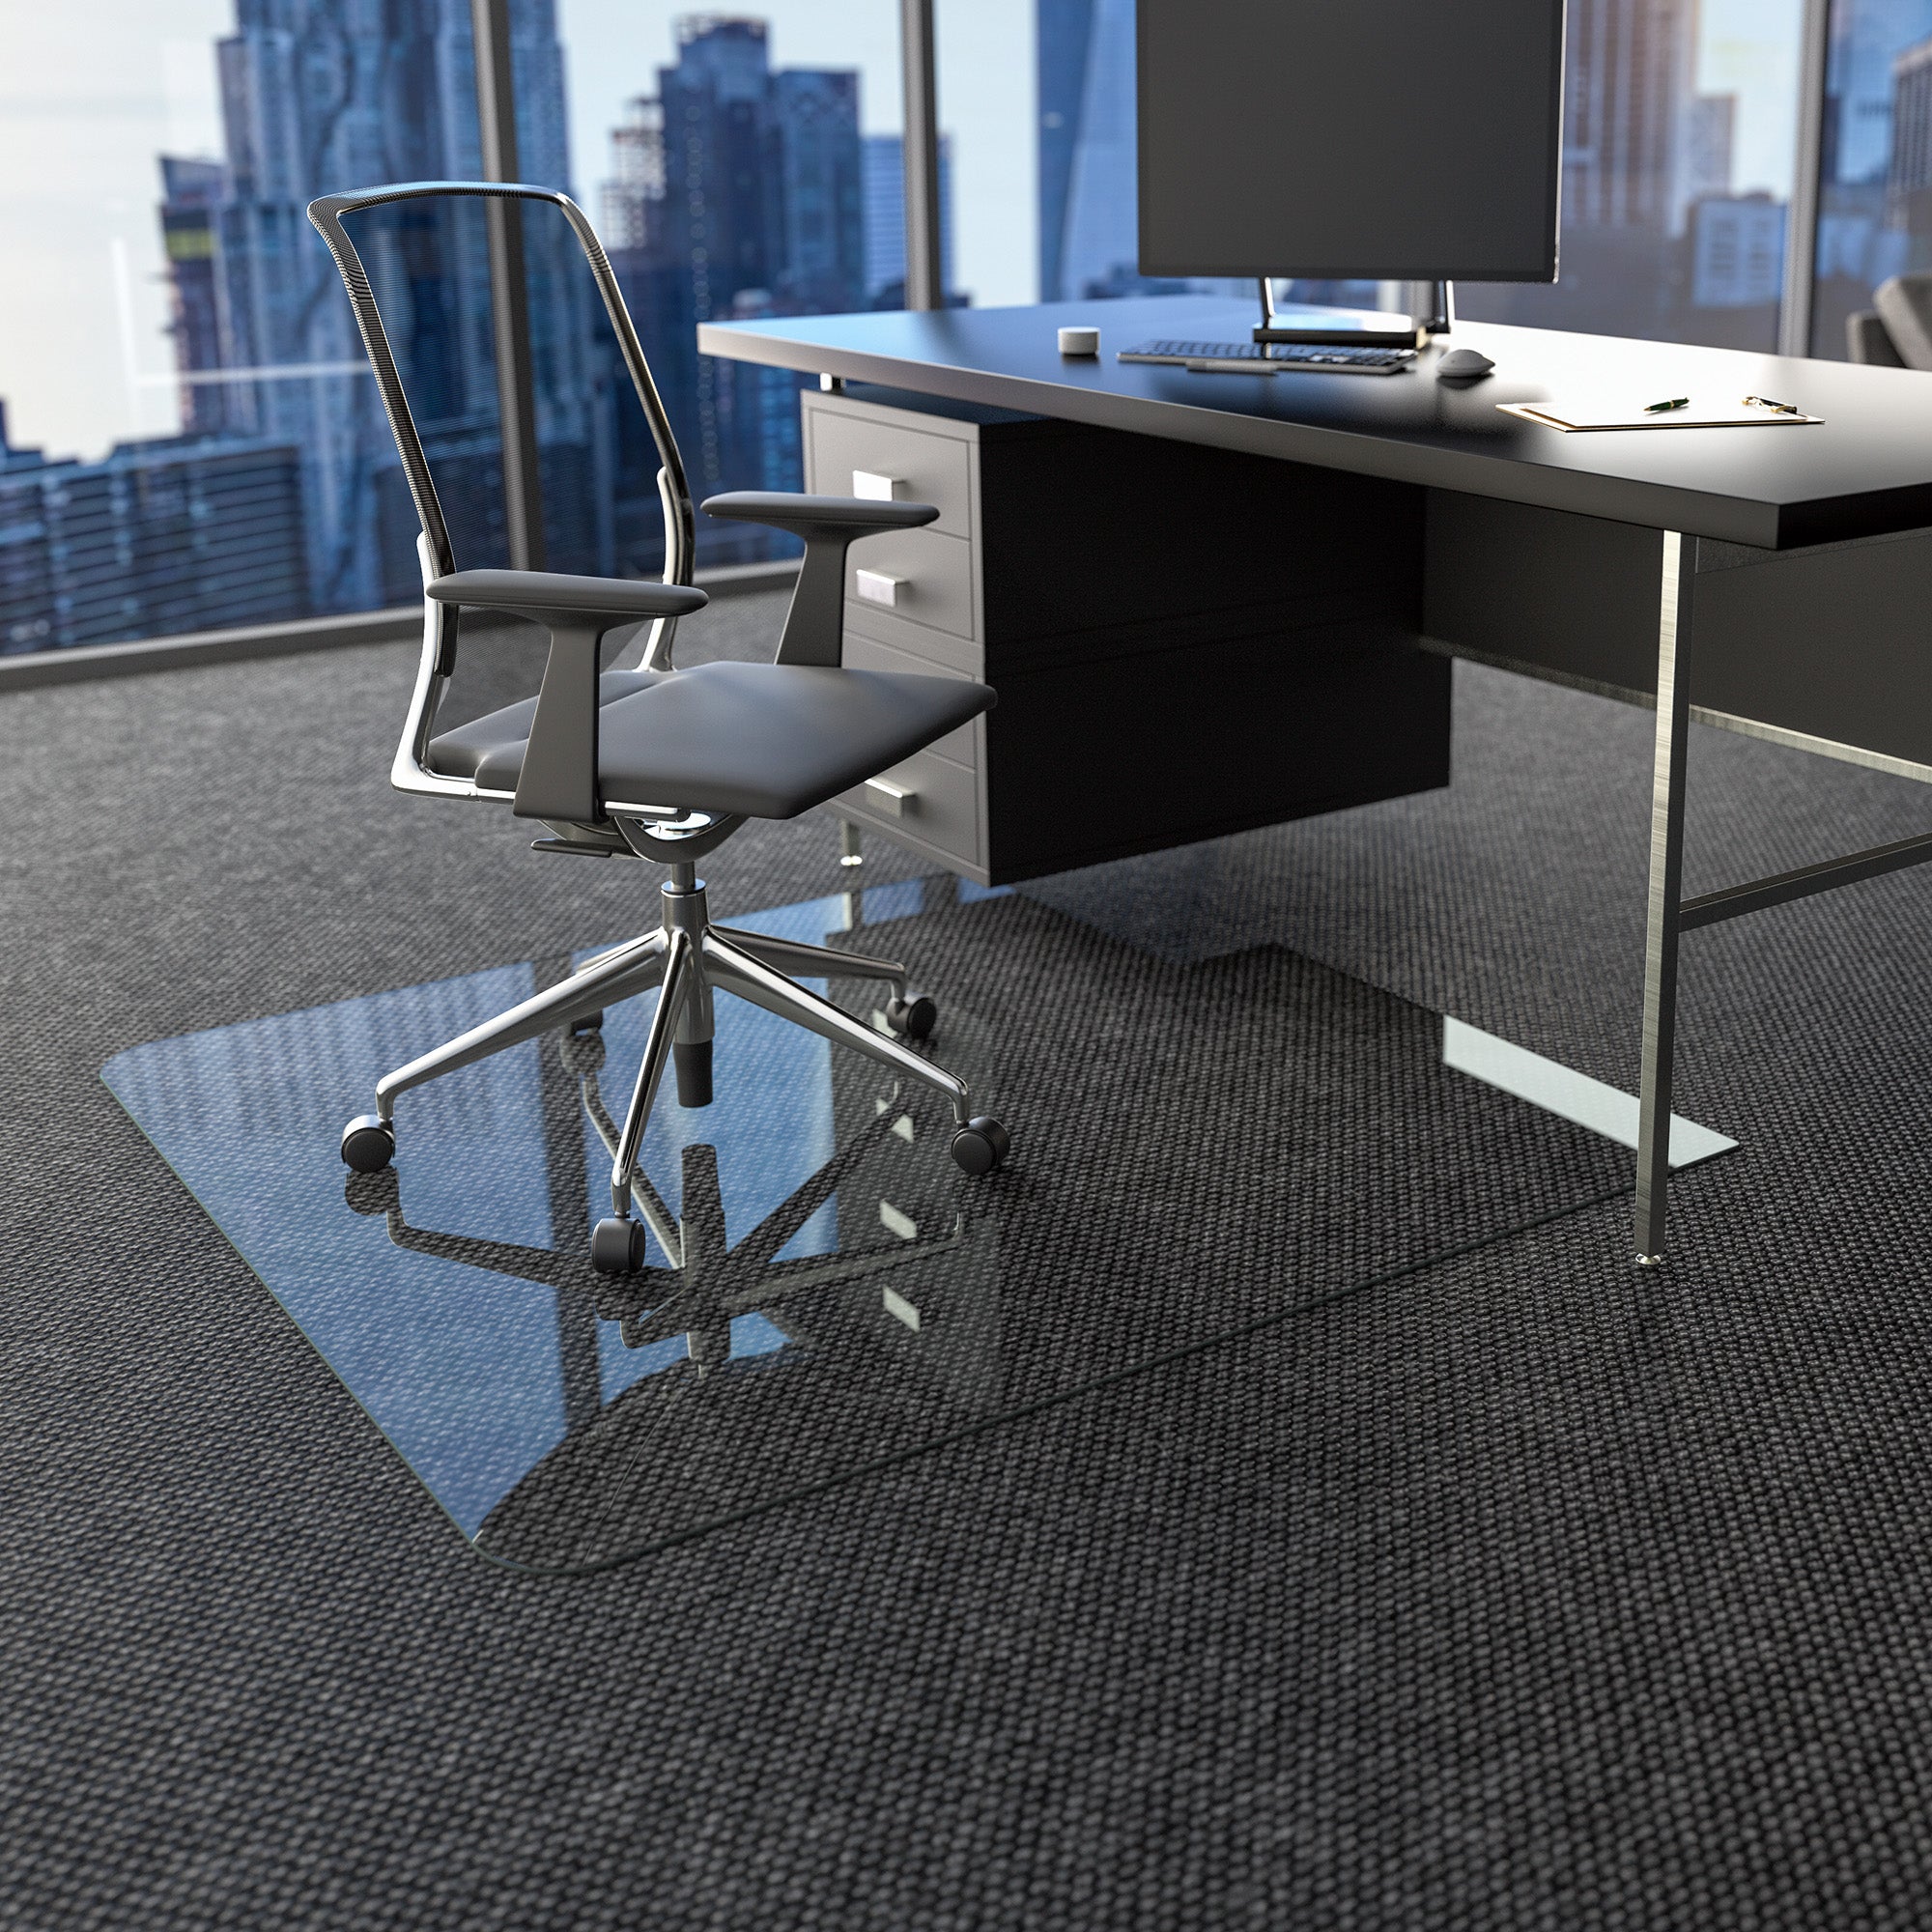 Do You Need A Chair Mat? Reasons You Do For All Flooring Types